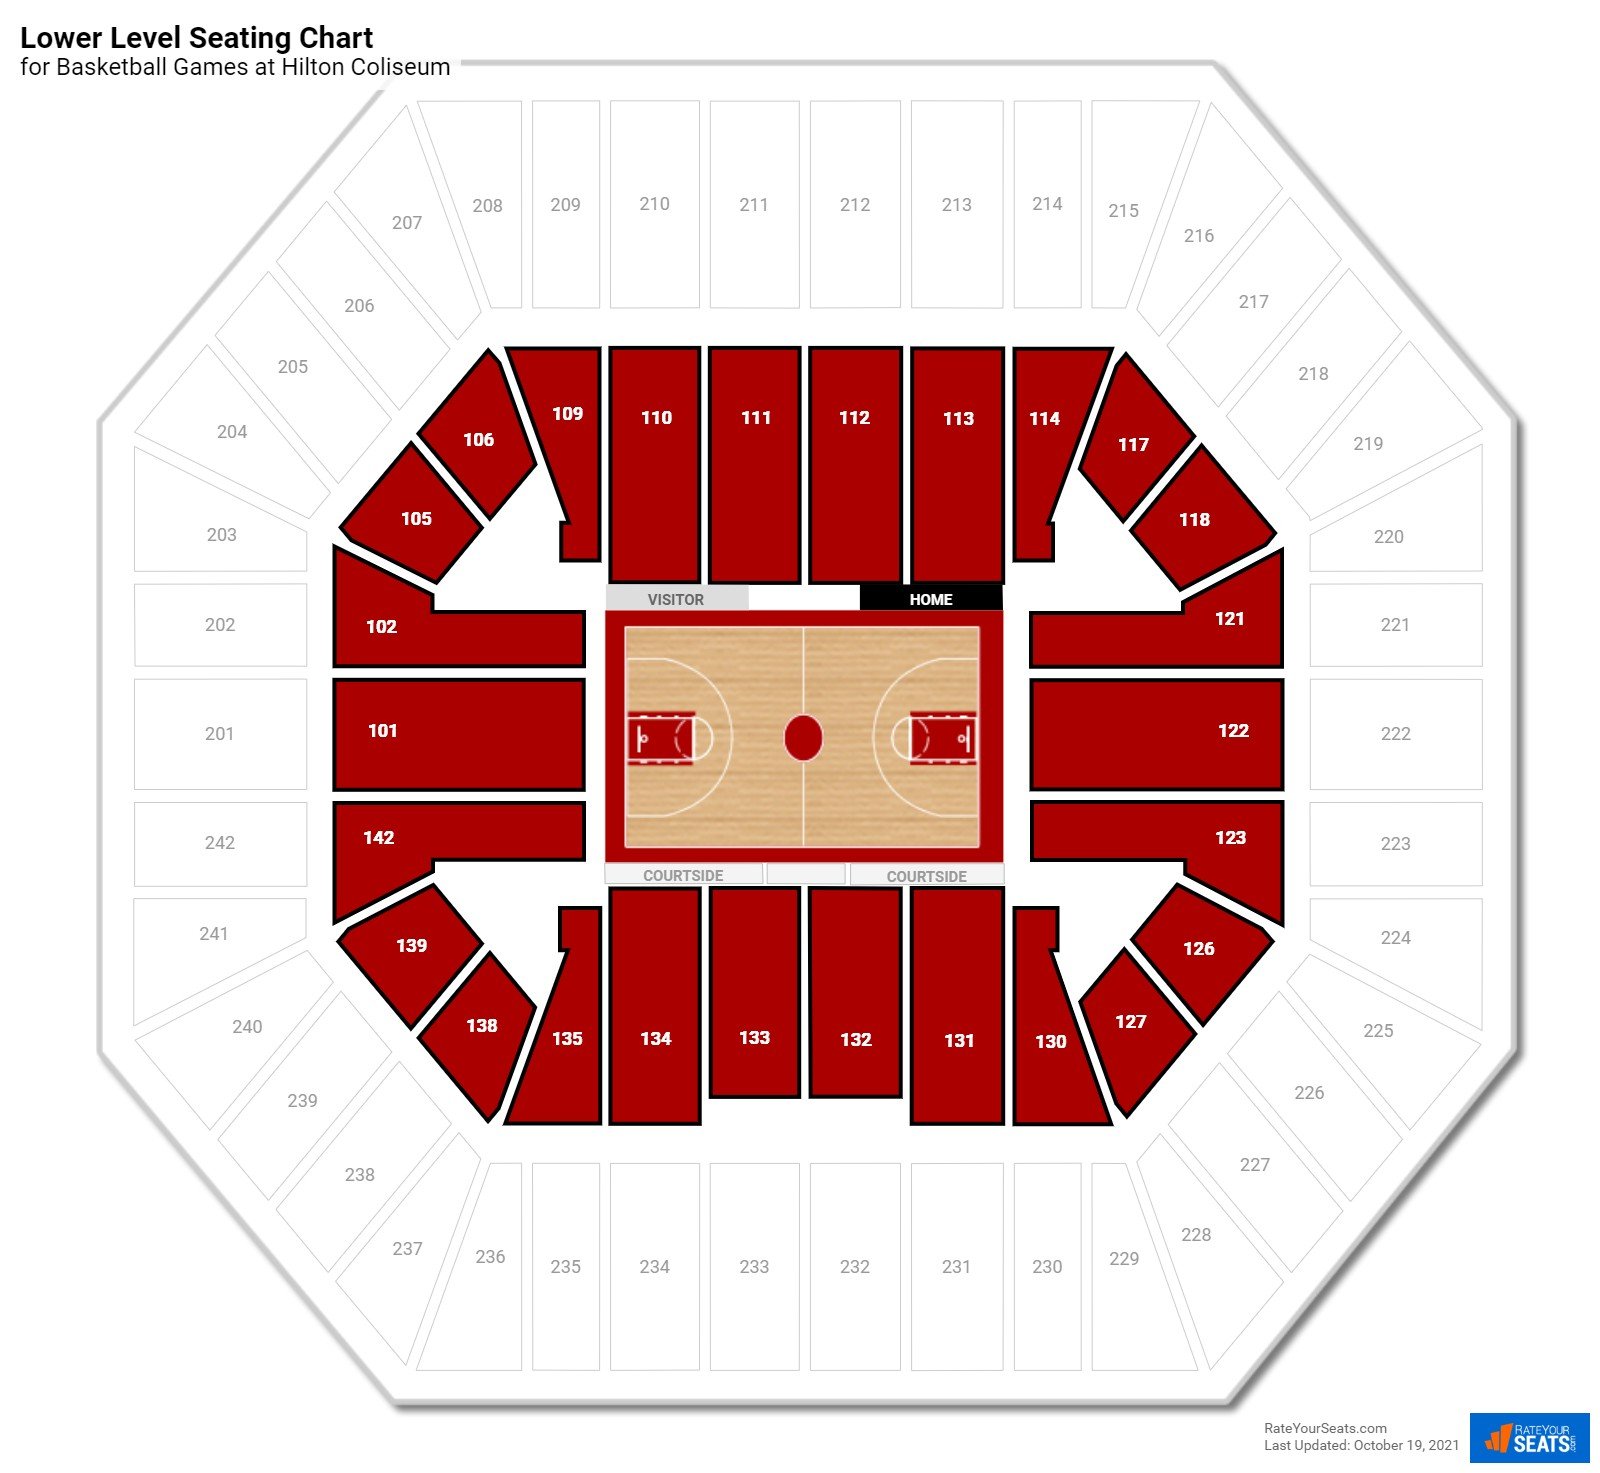 Basketball Lower Level Seating Chart at Hilton Coliseum